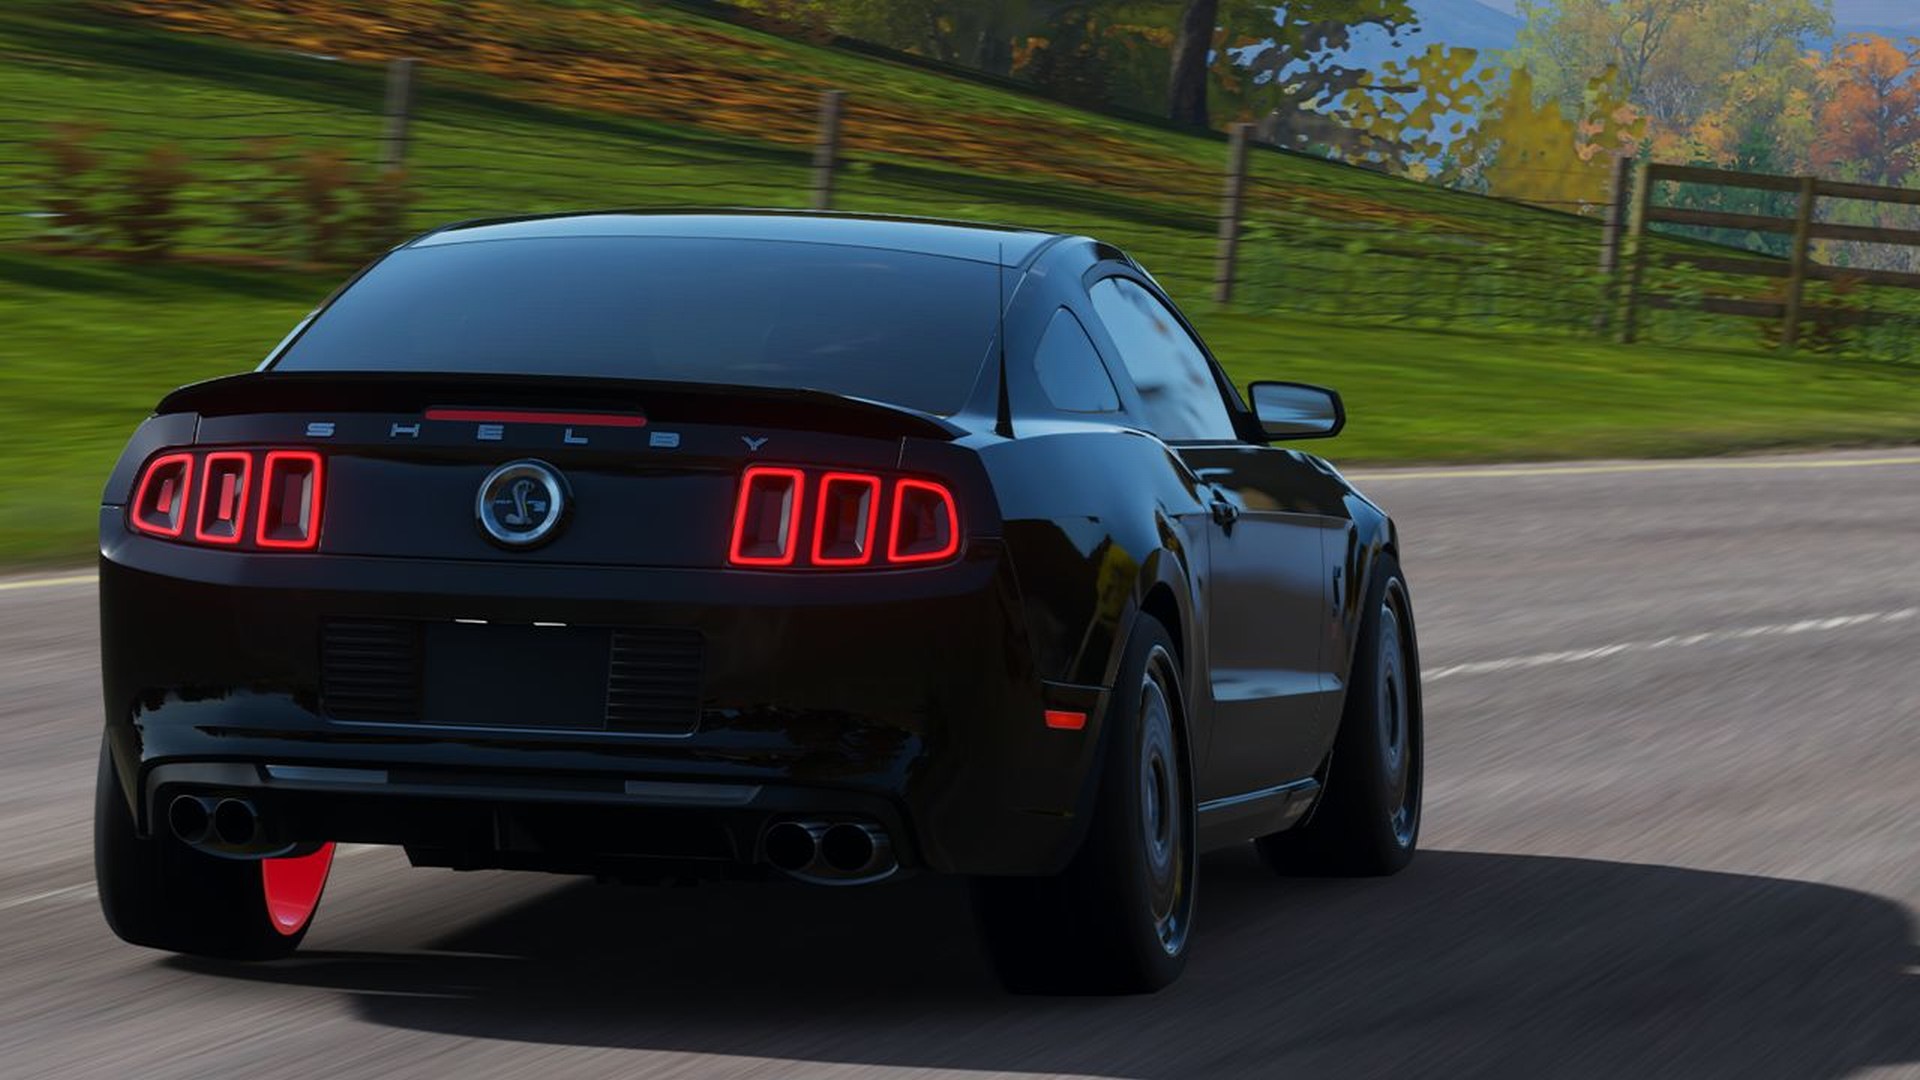 General 1920x1080 car vehicle video games Forza Forza Horizon 3 Ford Mustang Shelby Ford Ford Mustang Ford Mustang S-197 II